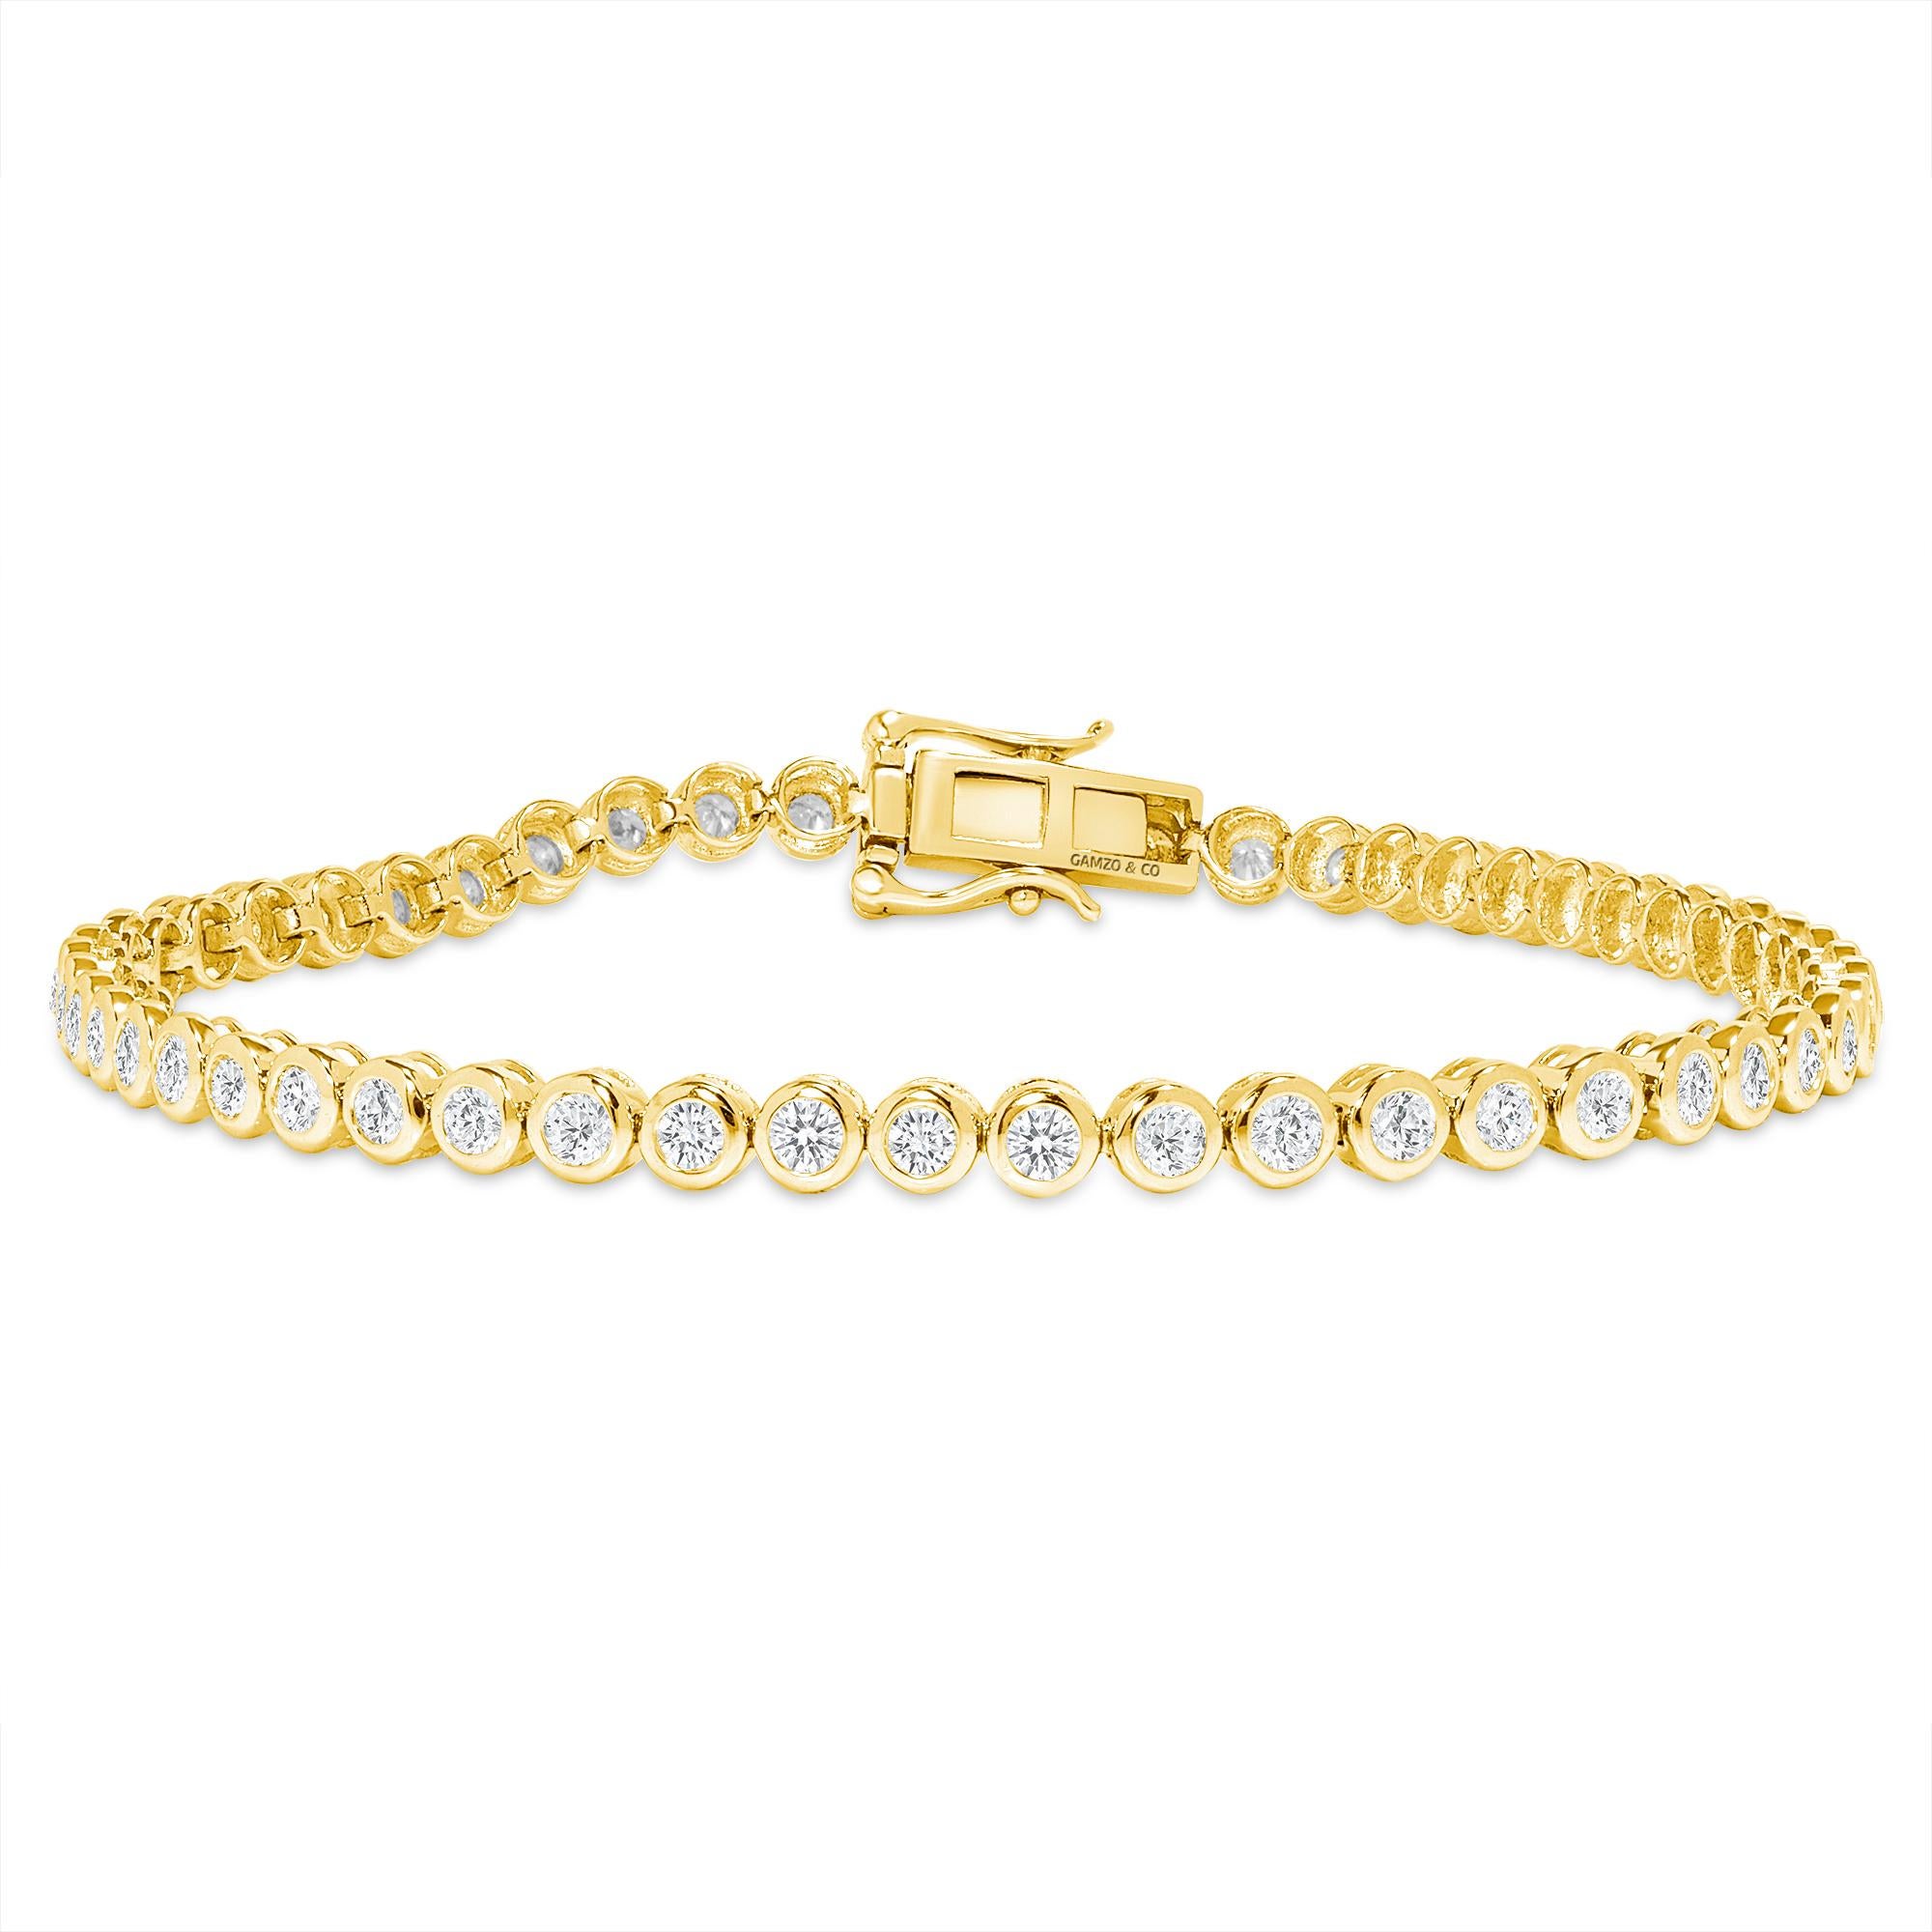 These beautiful round diamonds dance around your wrist as they absorb light and attention.
Metal: 14k Gold
Diamond Cut: Round
Diamond Total Carats: 3ct
Diamond Clarity: VS
Diamond Color: F
Color: Yellow Gold
Bracelet Length: 8 Inches 
Included with